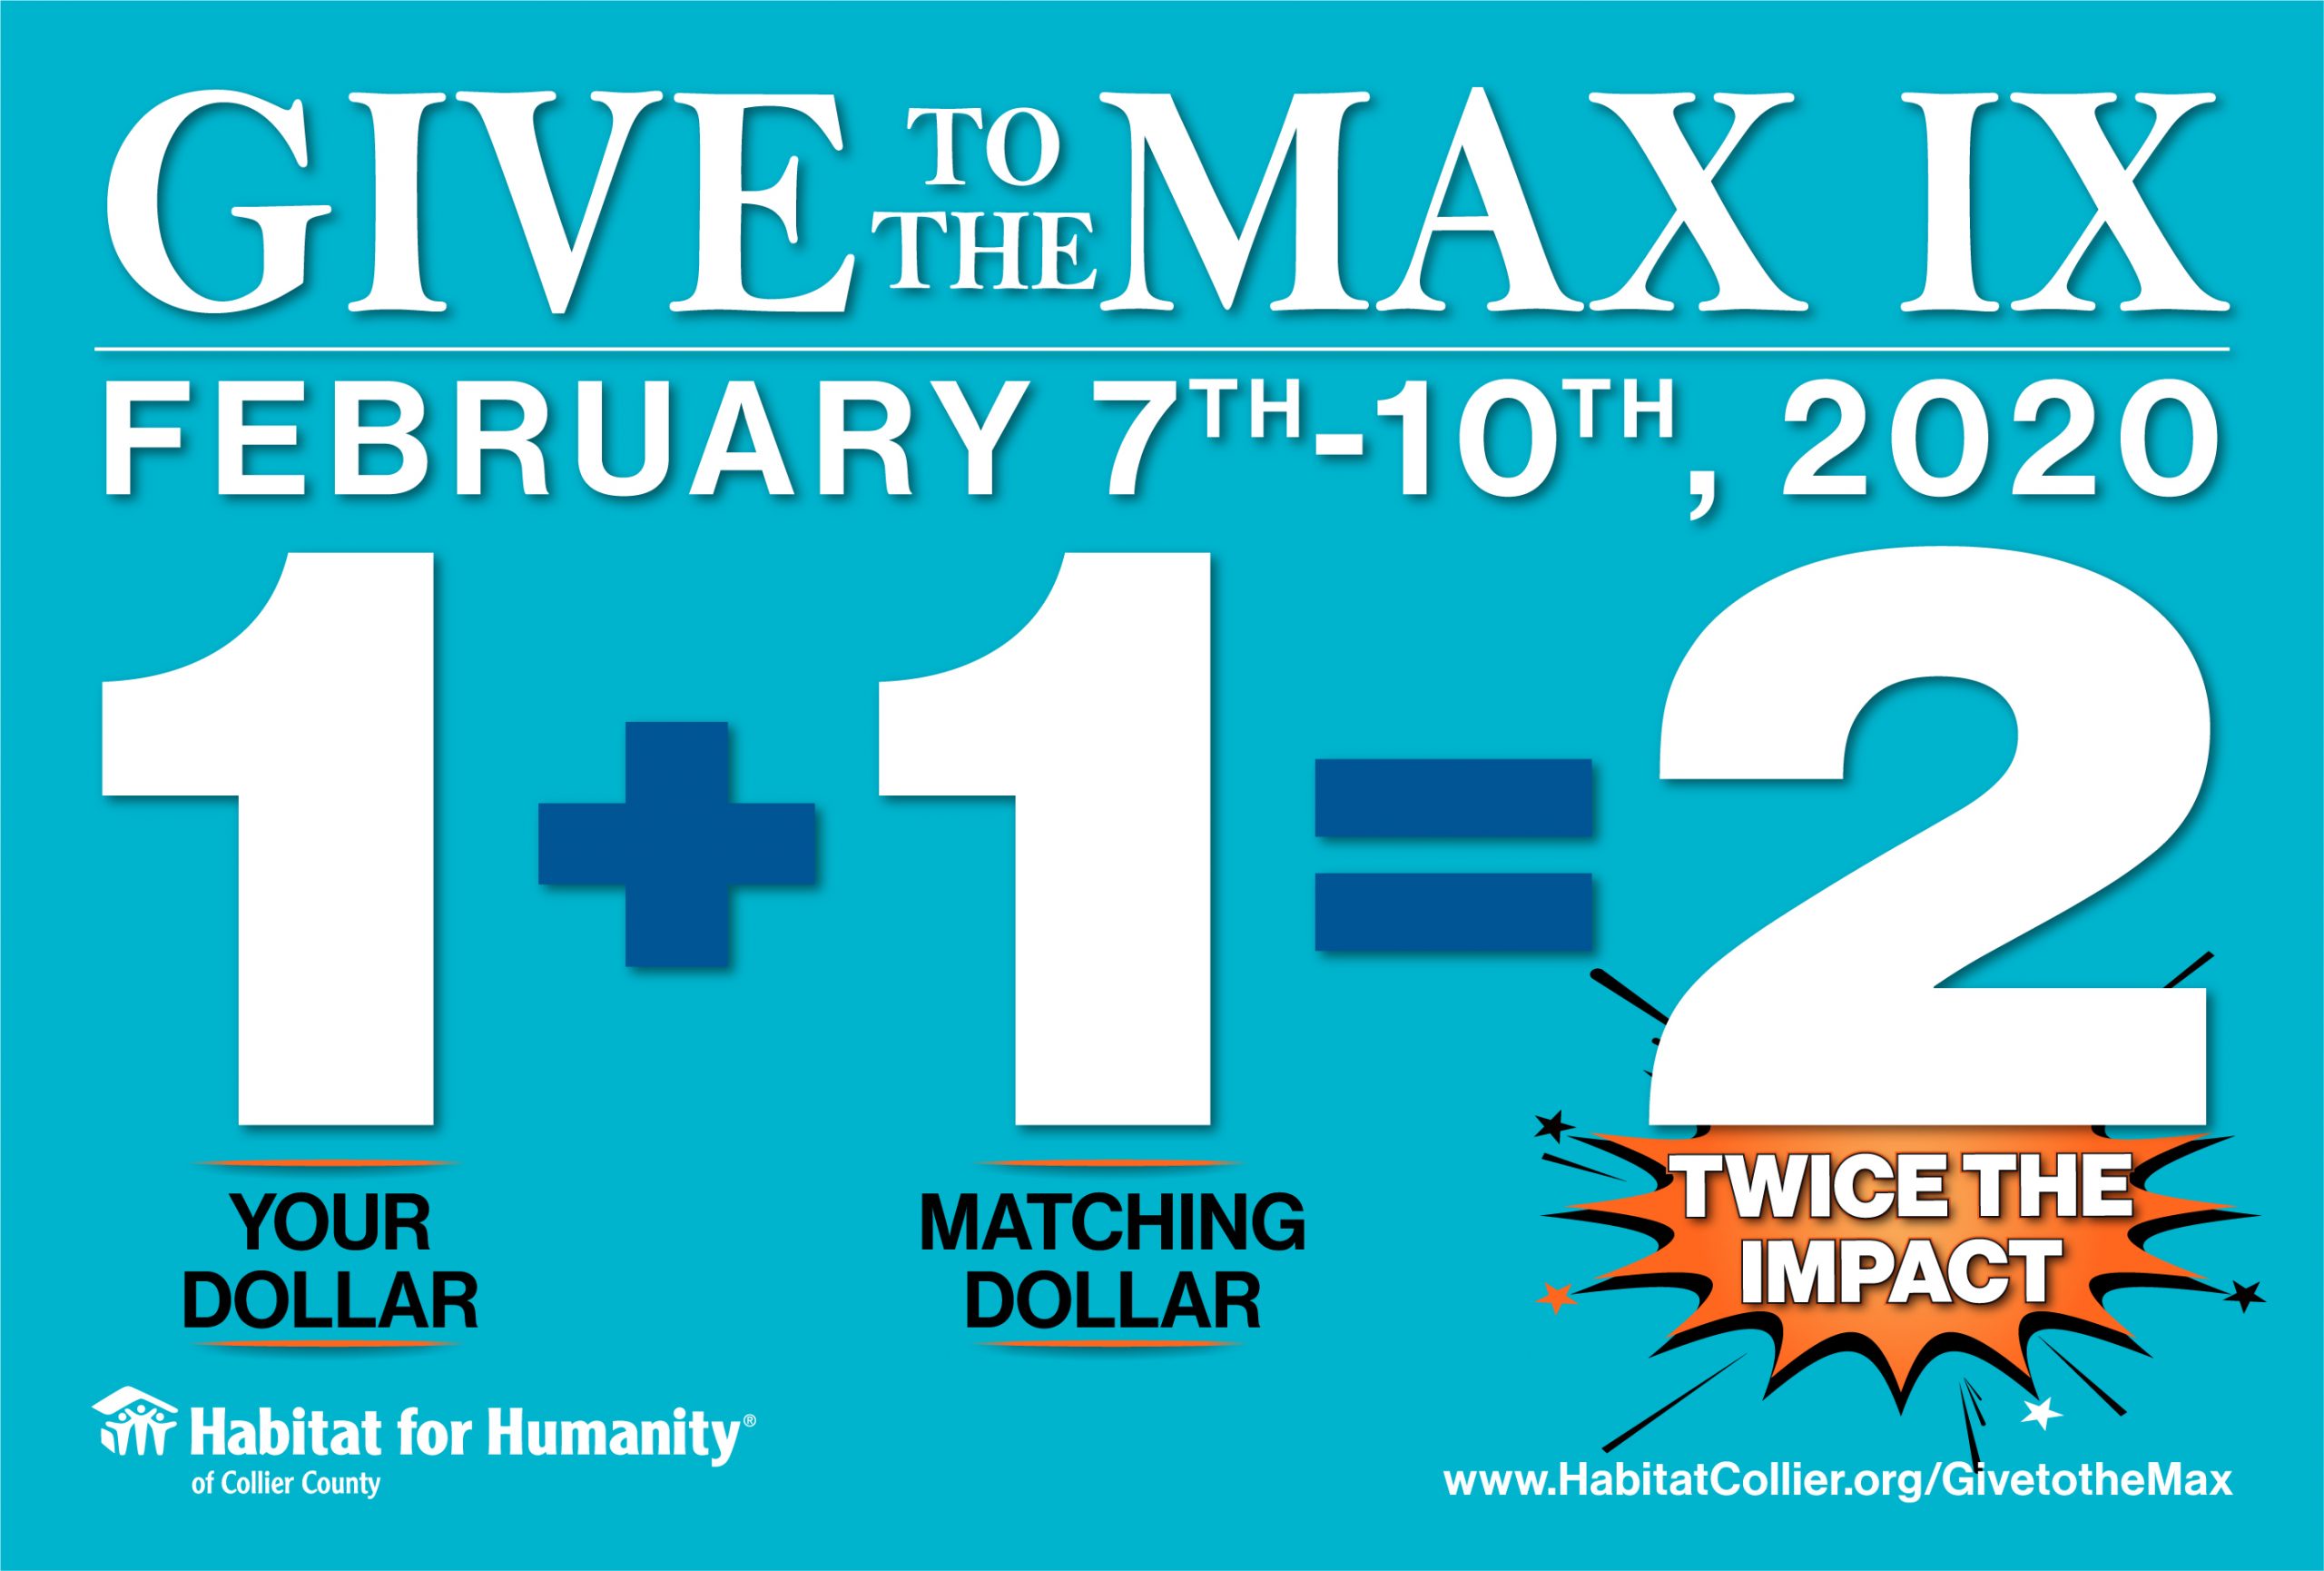 Give to the Max IX - Logo - https://s39939.pcdn.co/wp-content/uploads/2020/08/Fundraising_Habitat-for-Humanity-scaled.jpg